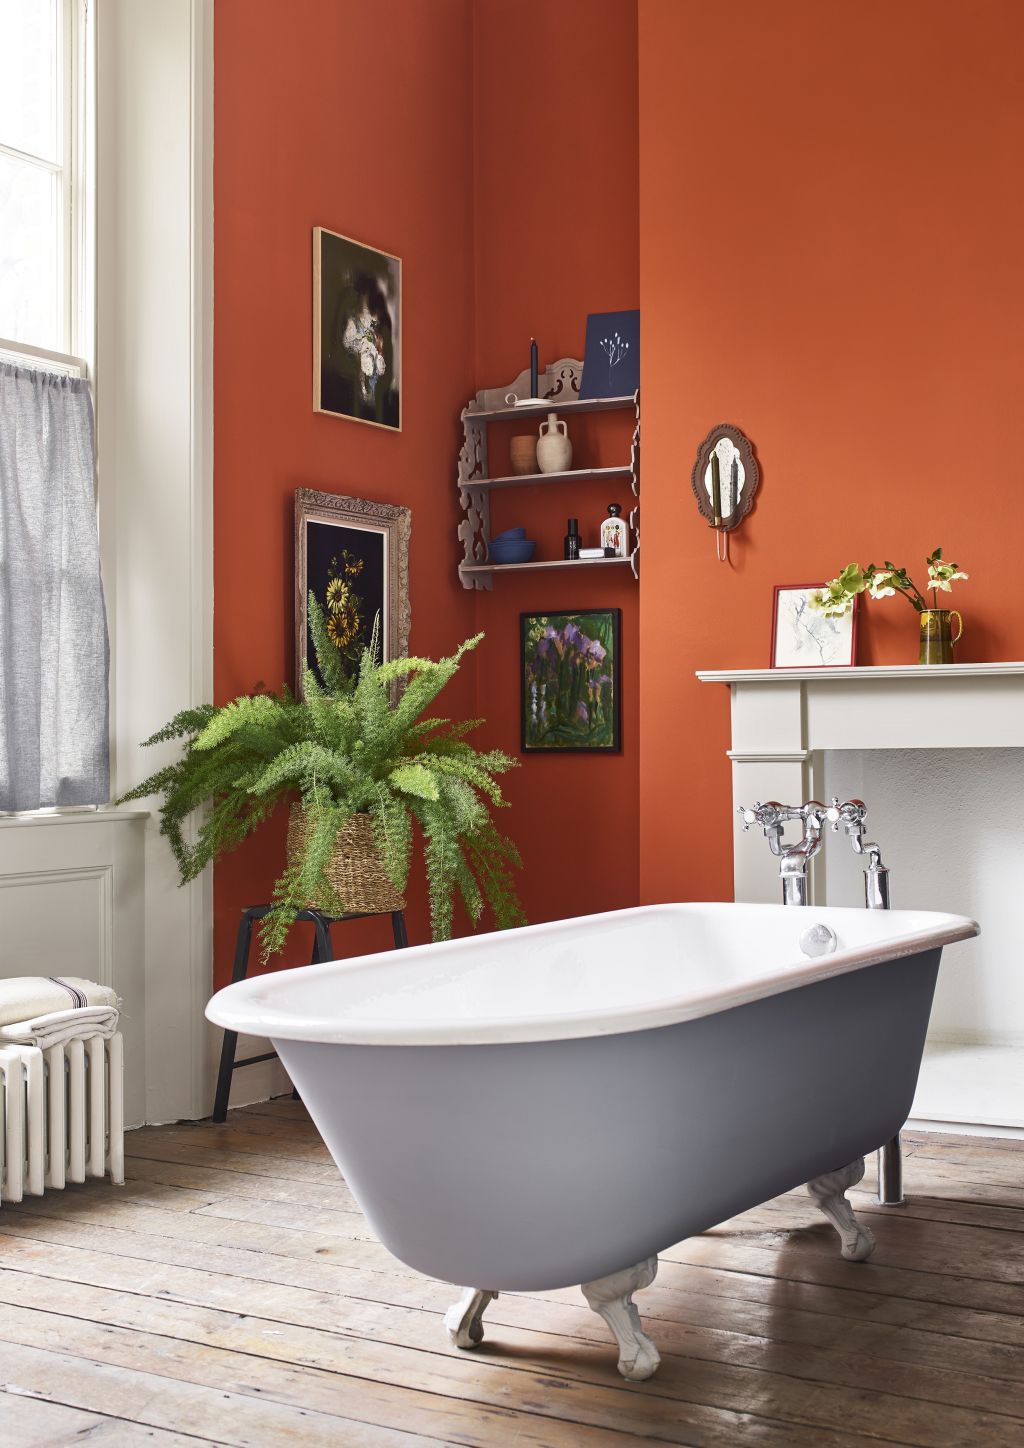 In this bathroom, Annie Sloan has opted for a warm terracotta wall paint and chalk paint in Louis Blue for the bath. Photo: Supplied